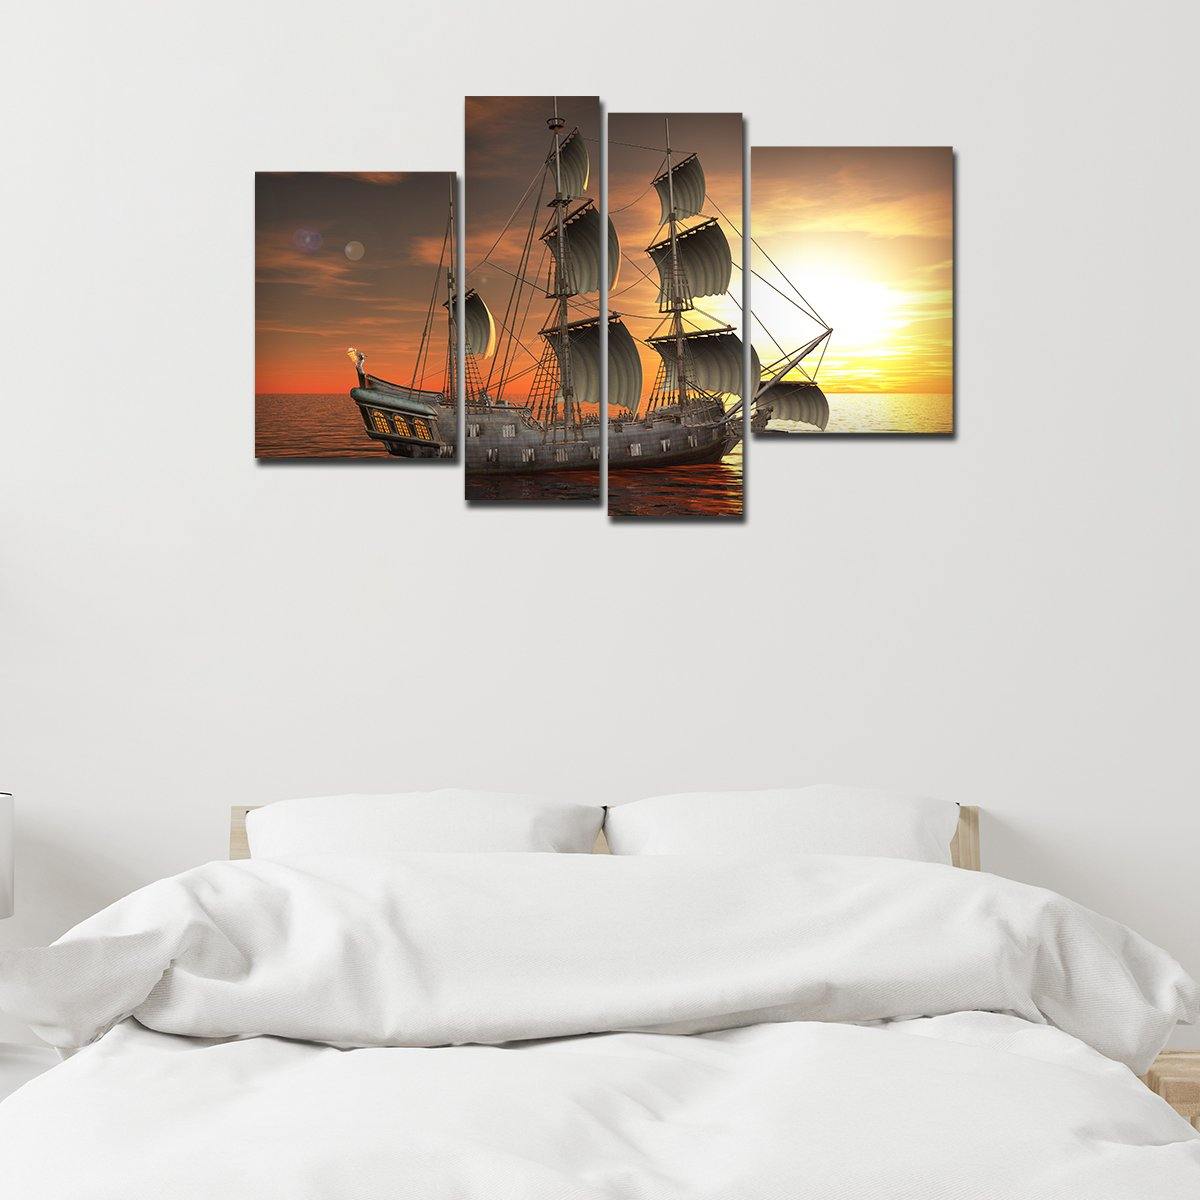 A Sailing Boat 4 Pieces Premium Wall Painting - Vibecrafts